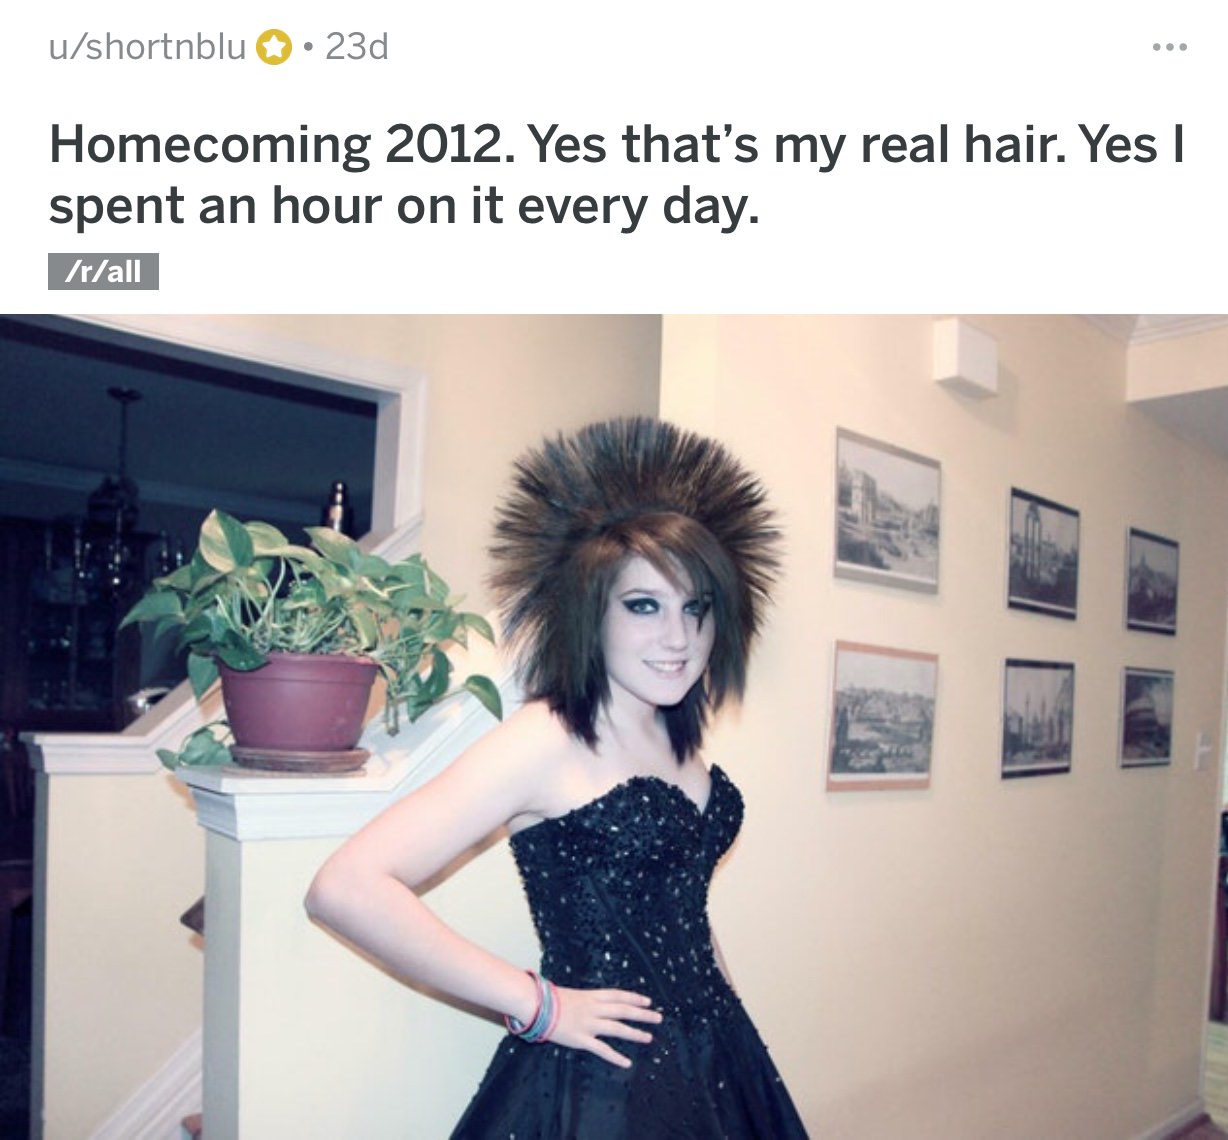 Photograph - ushortnblu 23d Homecoming 2012. Yes that's my real hair. Yes | spent an hour on it every day. rall